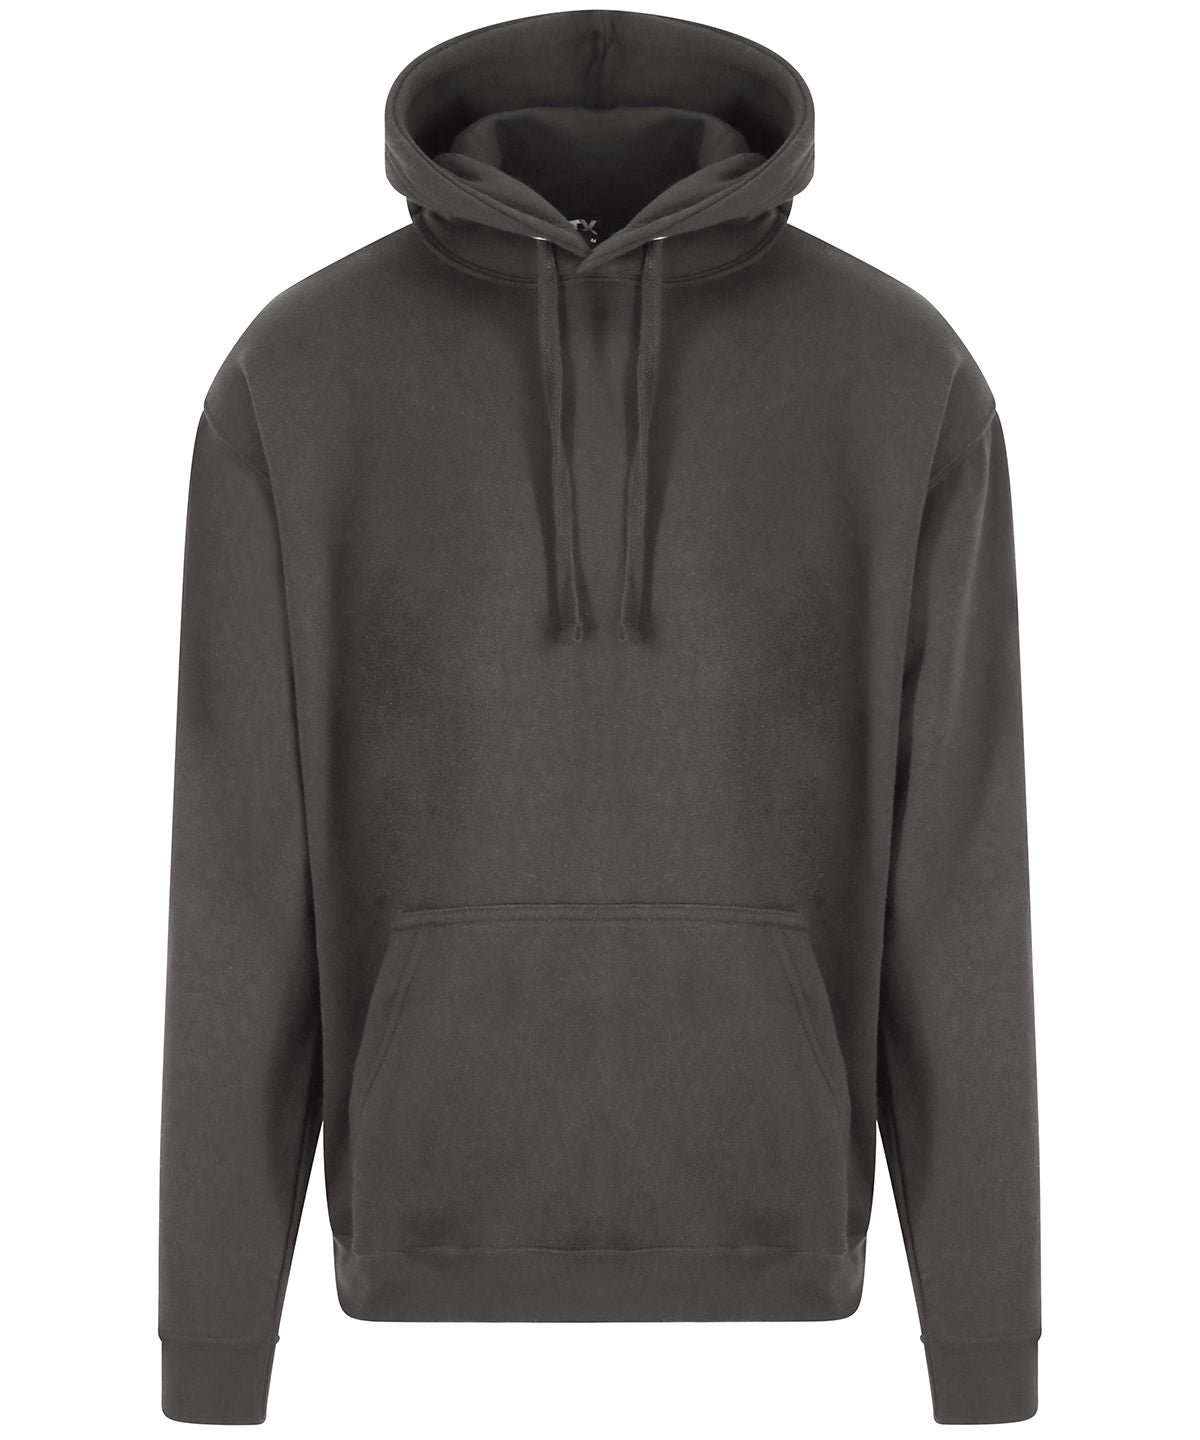 Classic VW Cup Unisex Hoodie